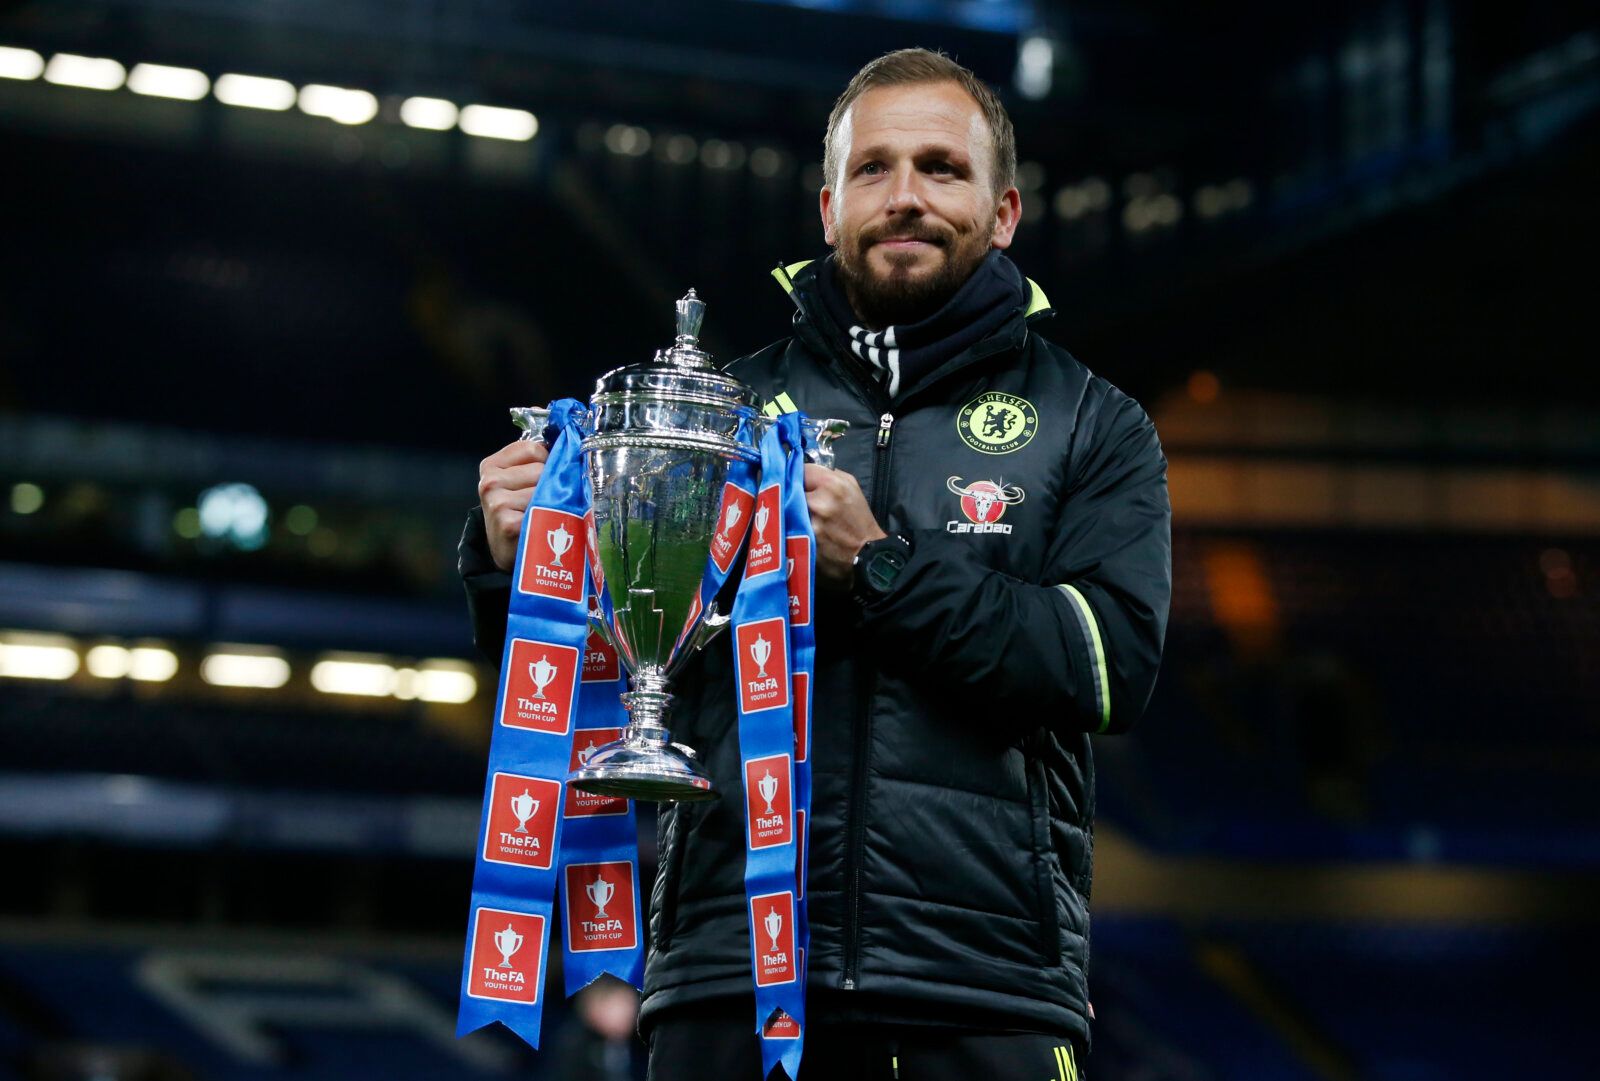 Britain Soccer Football - Chelsea v Manchester City - FA Youth Cup Final Second Leg - Stamford Bridge - 26/4/17 Chelsea youth team coach Jody Morris celebrates with the trophy at the end Mandatory Credit: Action Images / Peter Cziborra Livepic EDITORIAL USE ONLY.